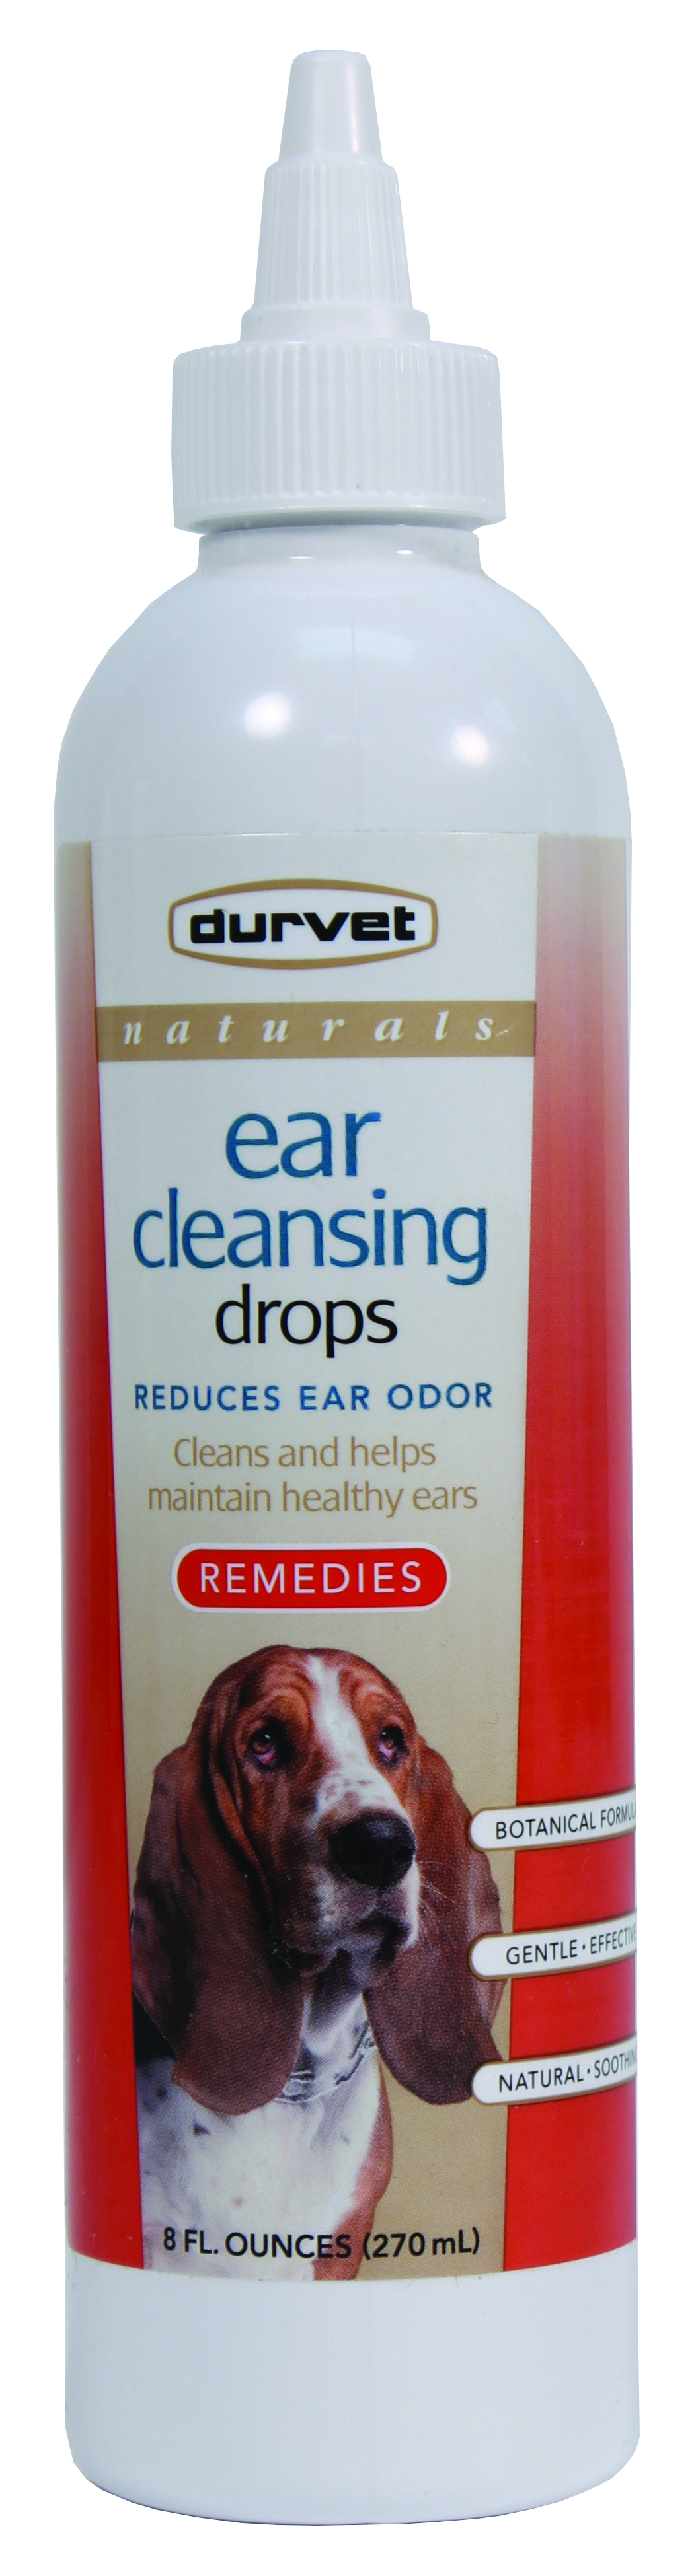 NATURALS EAR CLEANSING DROPS